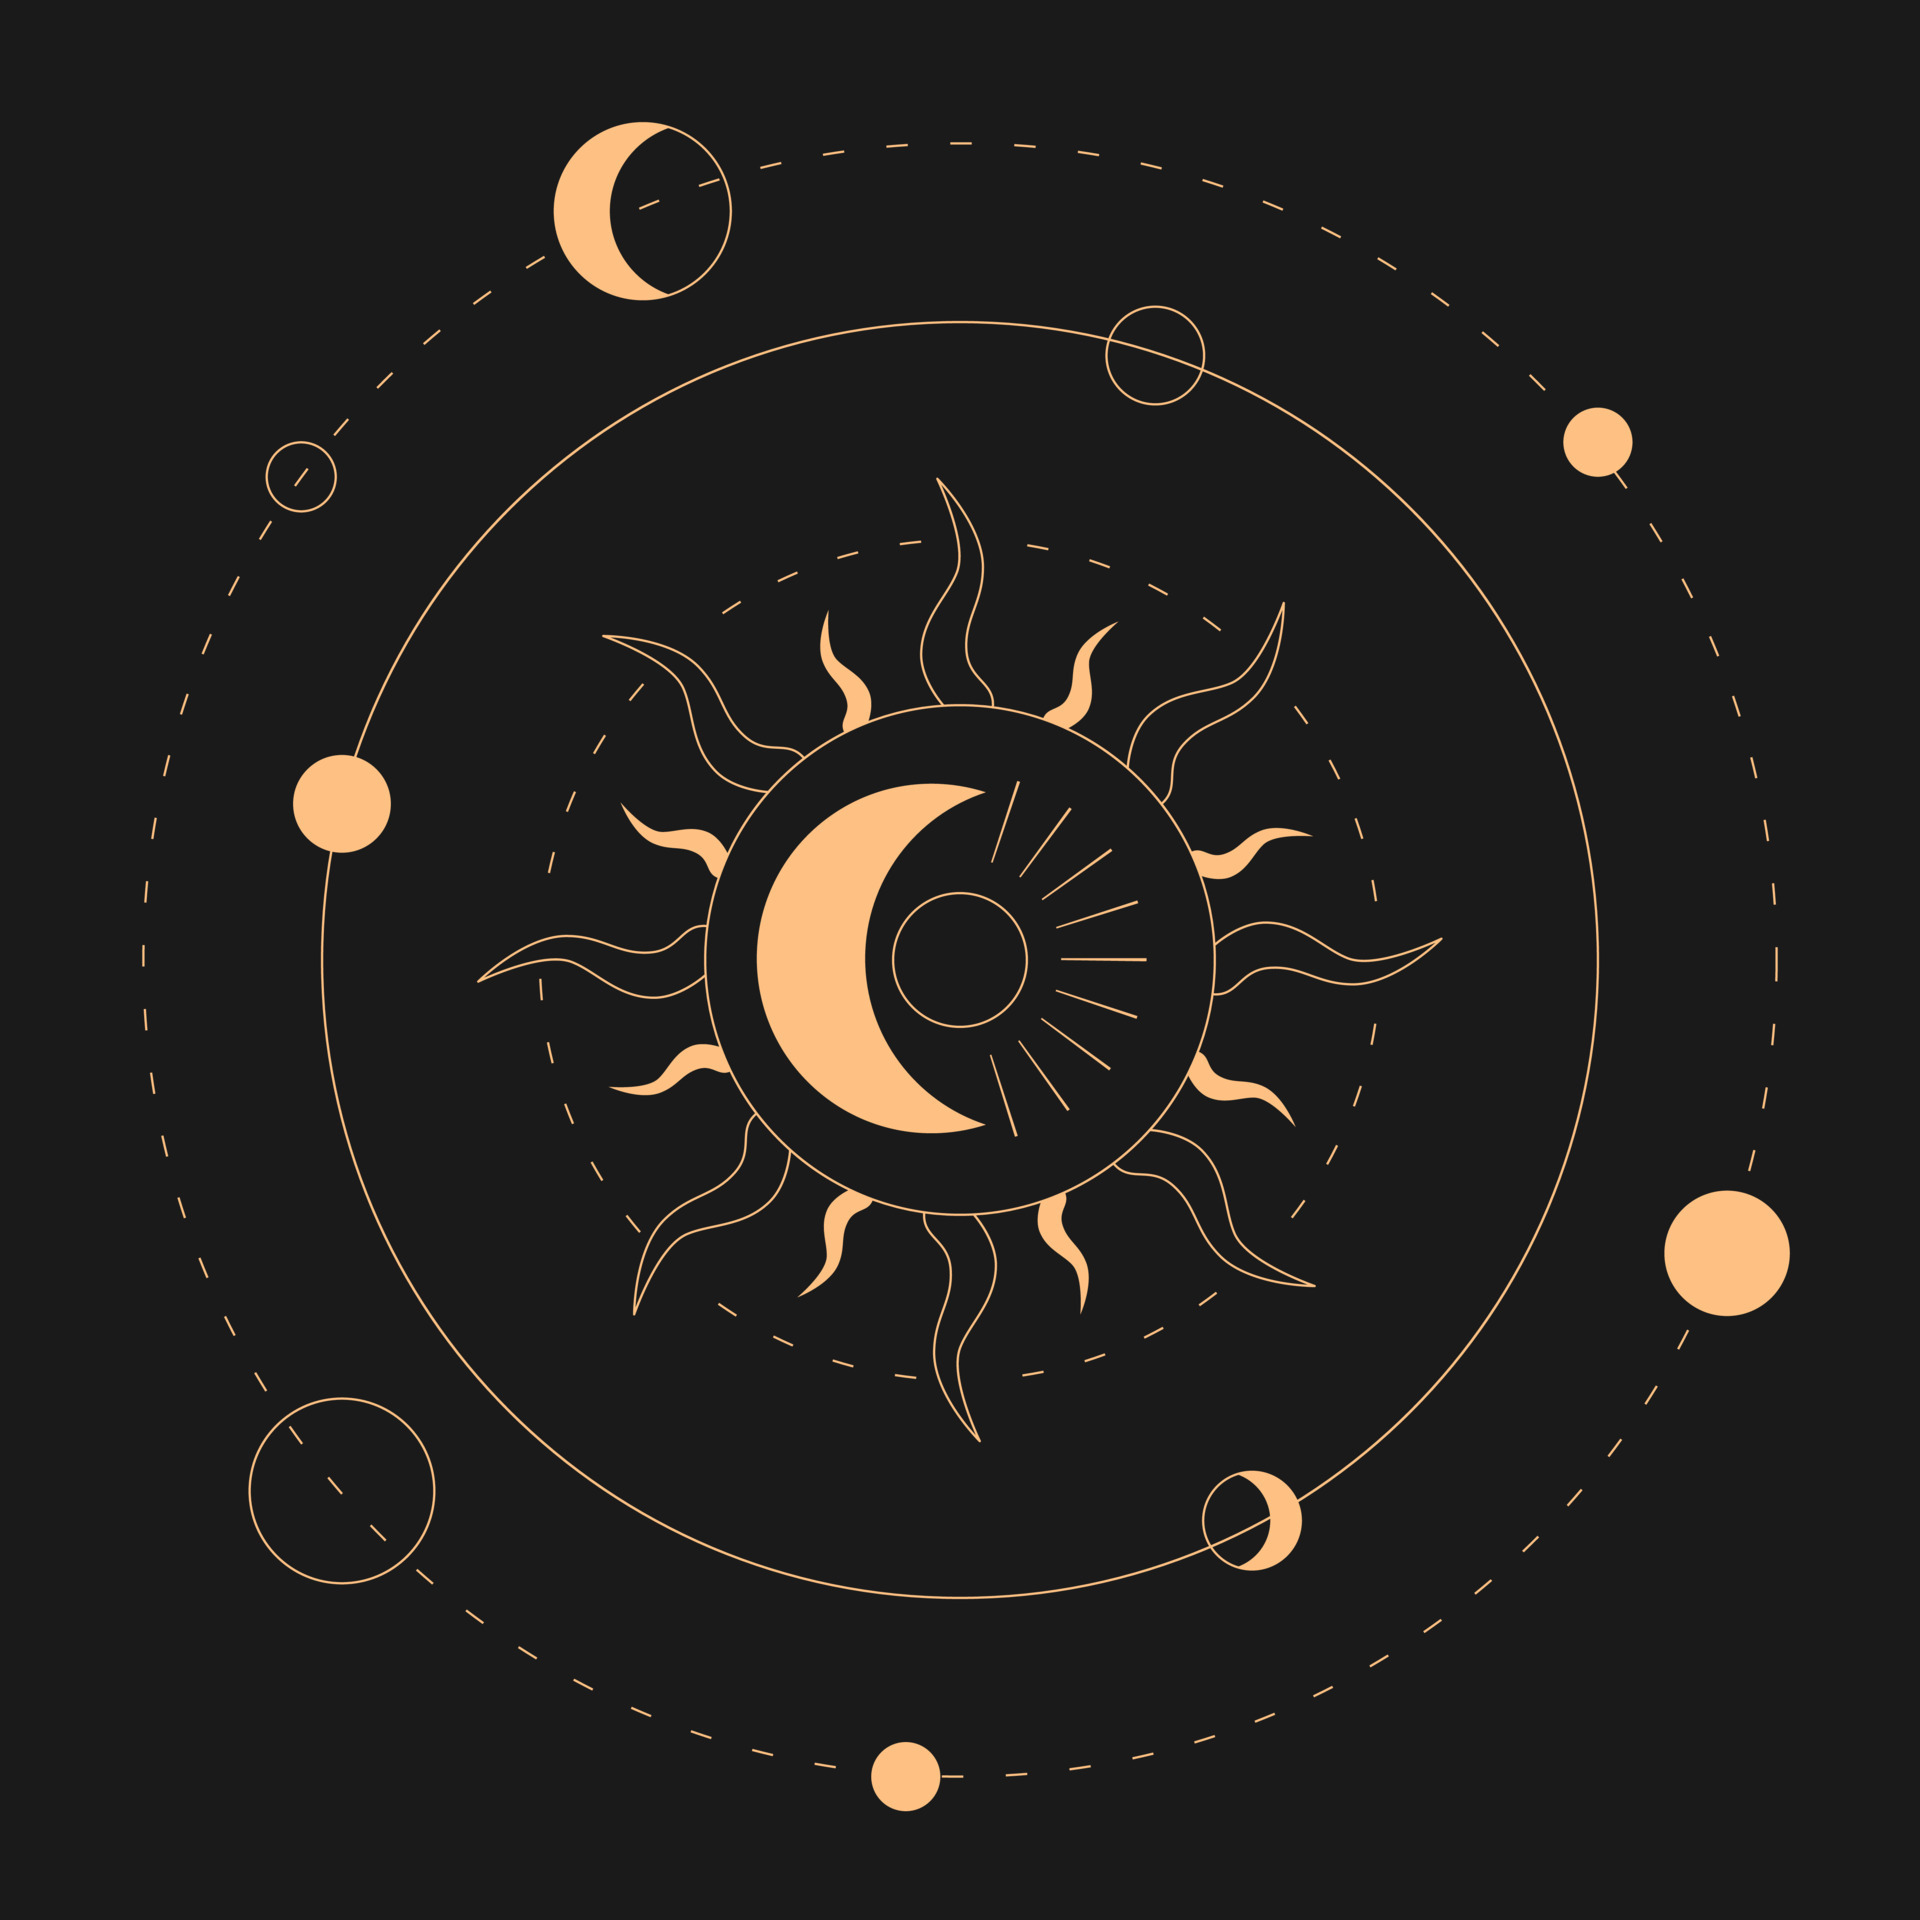 Modèle pour la fiche de liens Celestial-sun-and-moon-magical-banner-for-astrology-celestial-alchemy-device-of-the-universe-crescent-sun-with-the-moon-and-planets-on-a-black-background-esoteric-illustration-vector